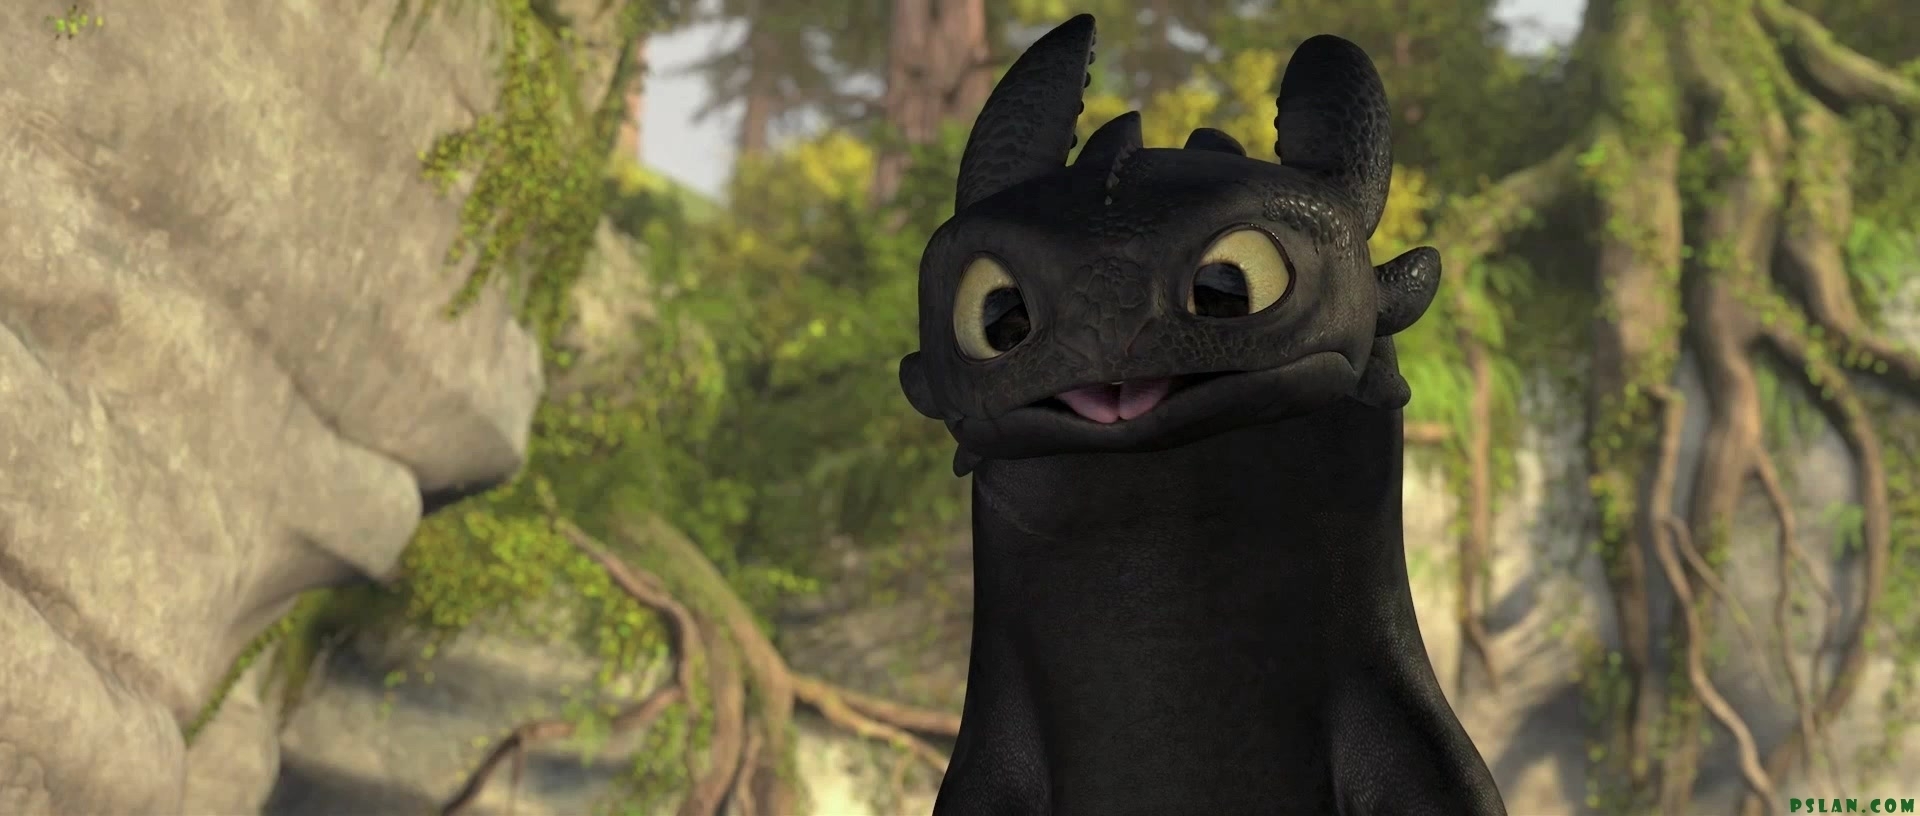 toothless-how-to-train-your-dragon-96263